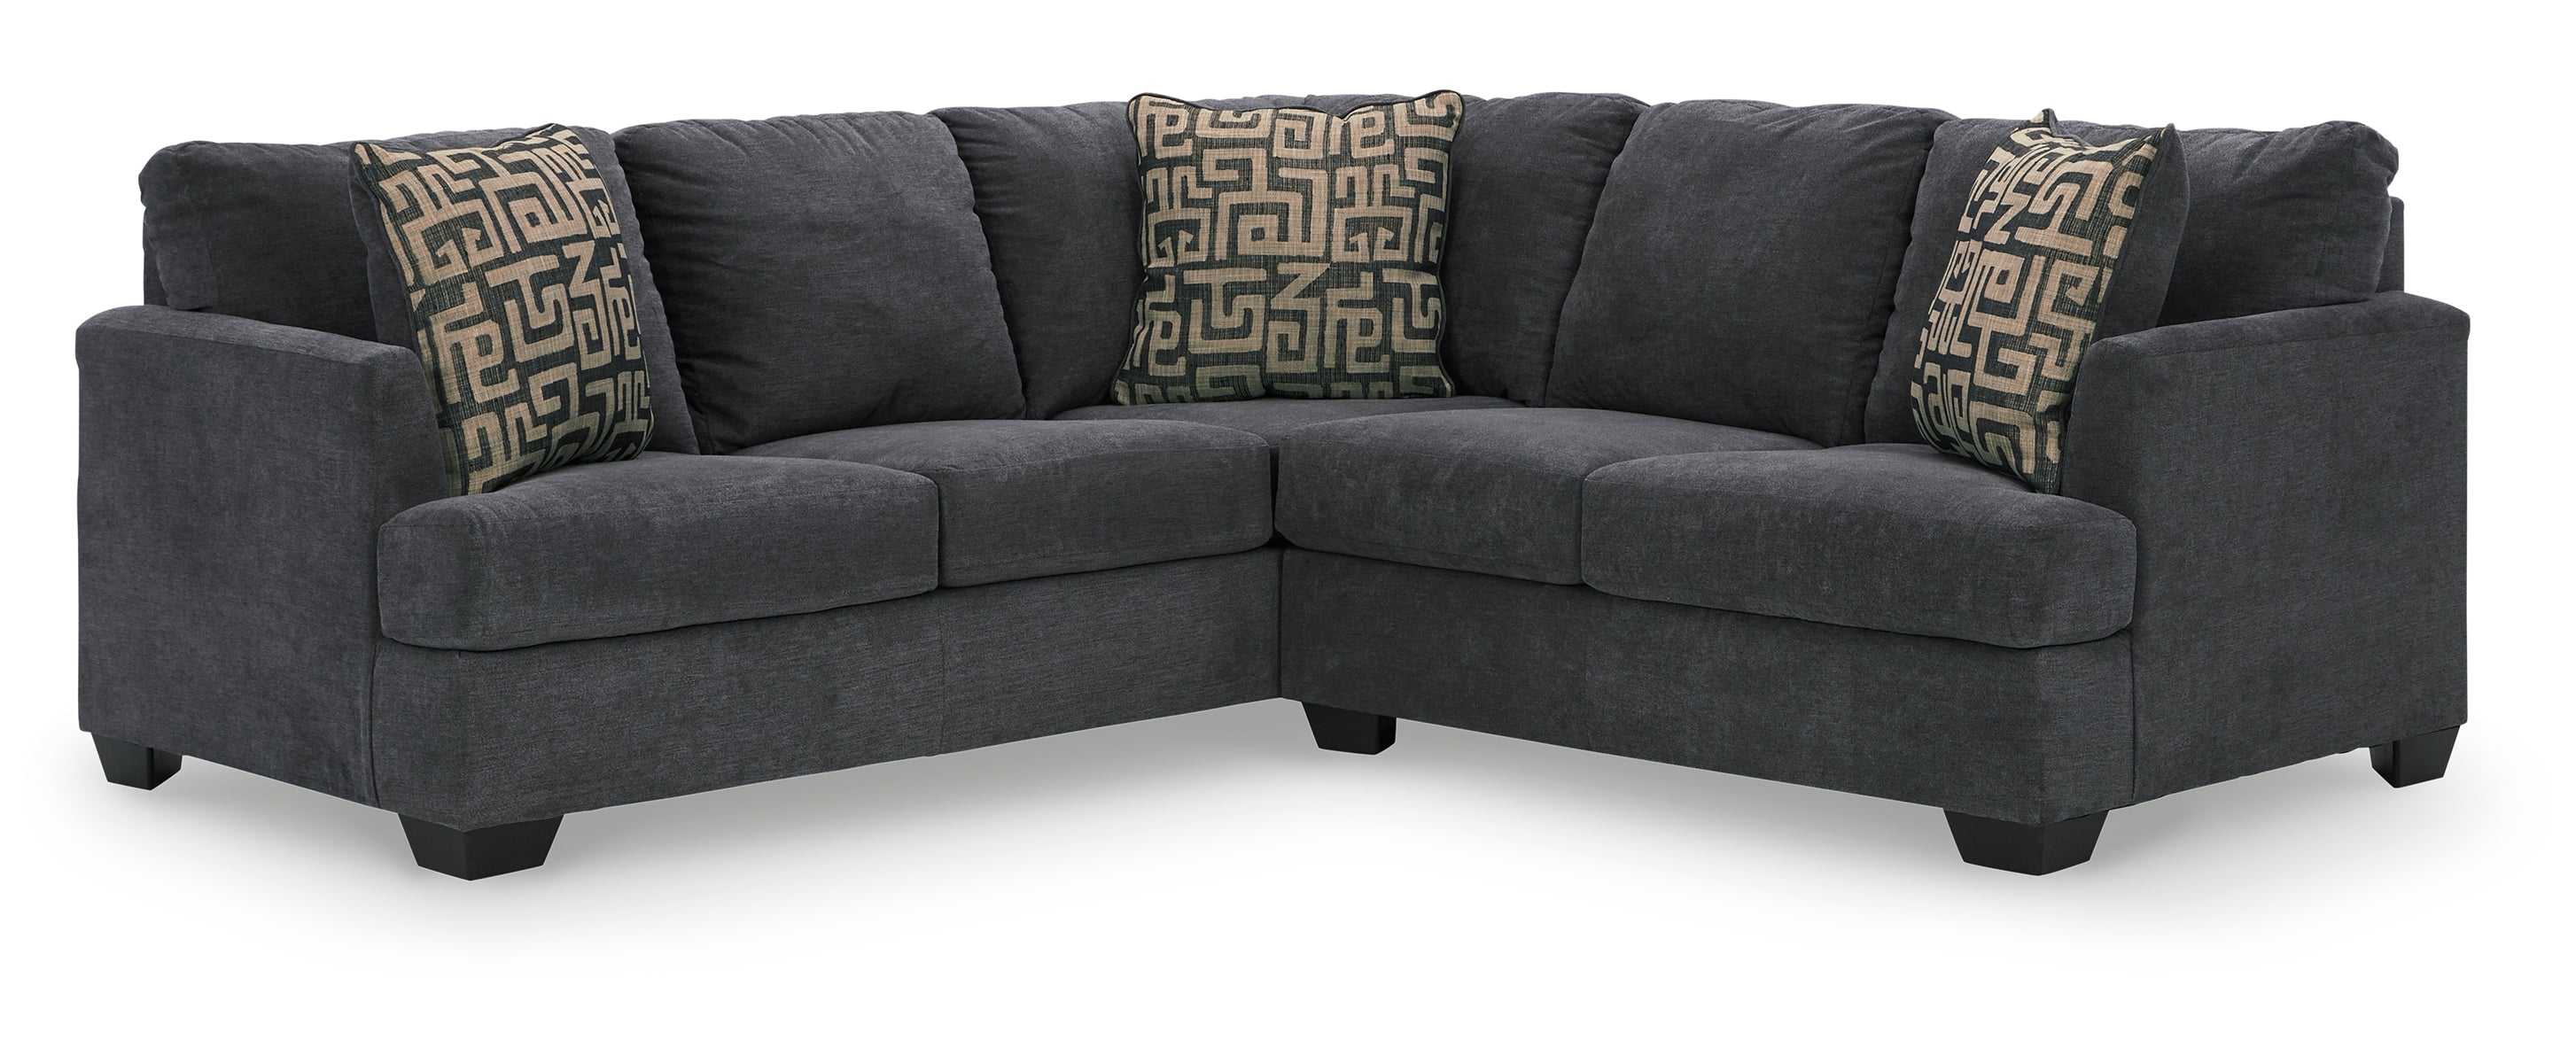 Ambrielle 2-Piece Sectional with Ottoman